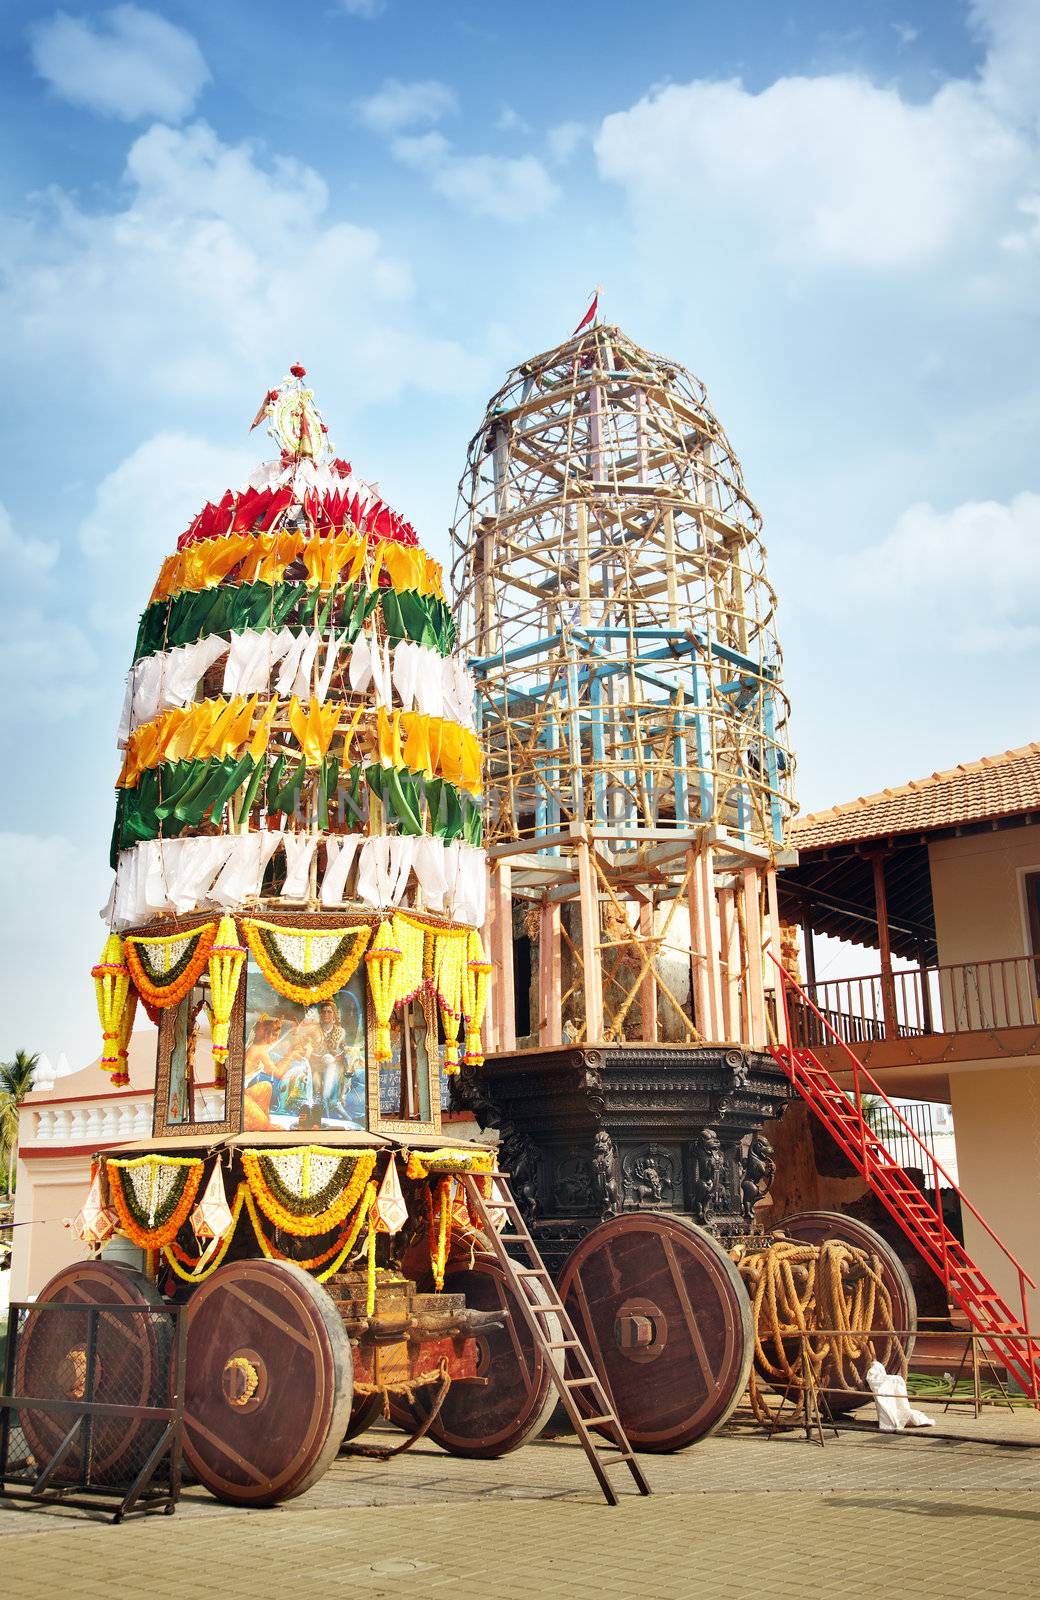 Traditional holly chariot with wooden wheels in the Indian religious temple. Preparation for Vishnu festival. India, Goa